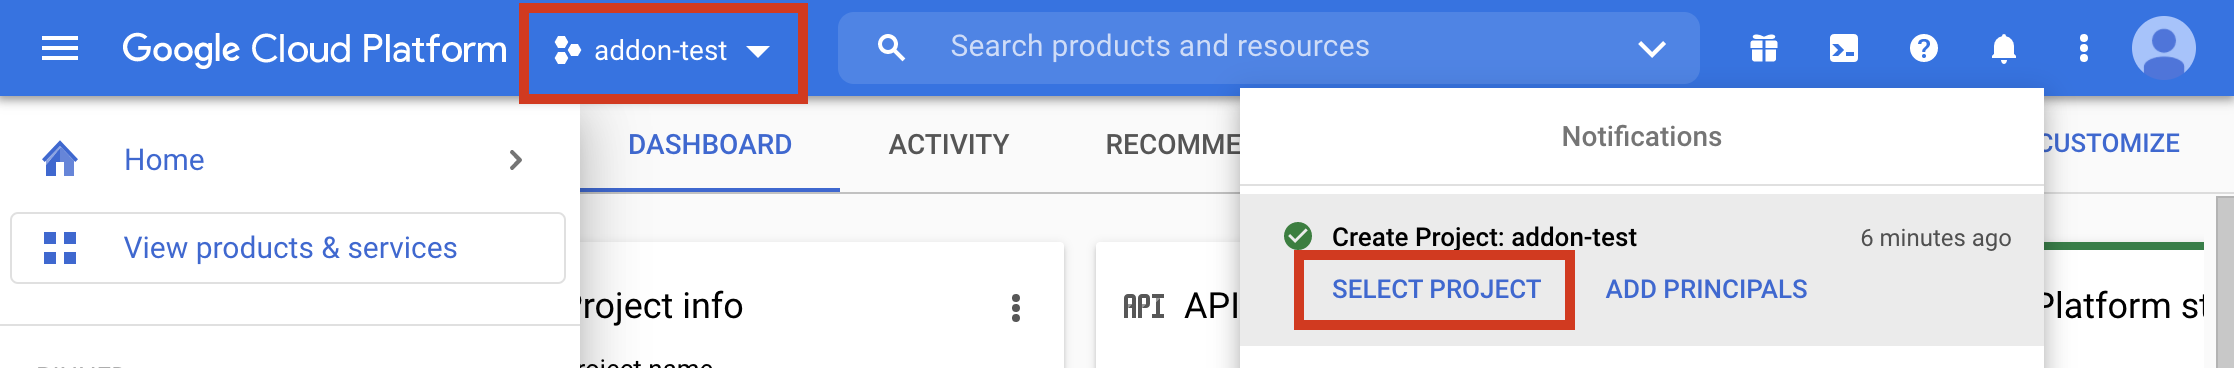 Select the project in the Google Cloud
console